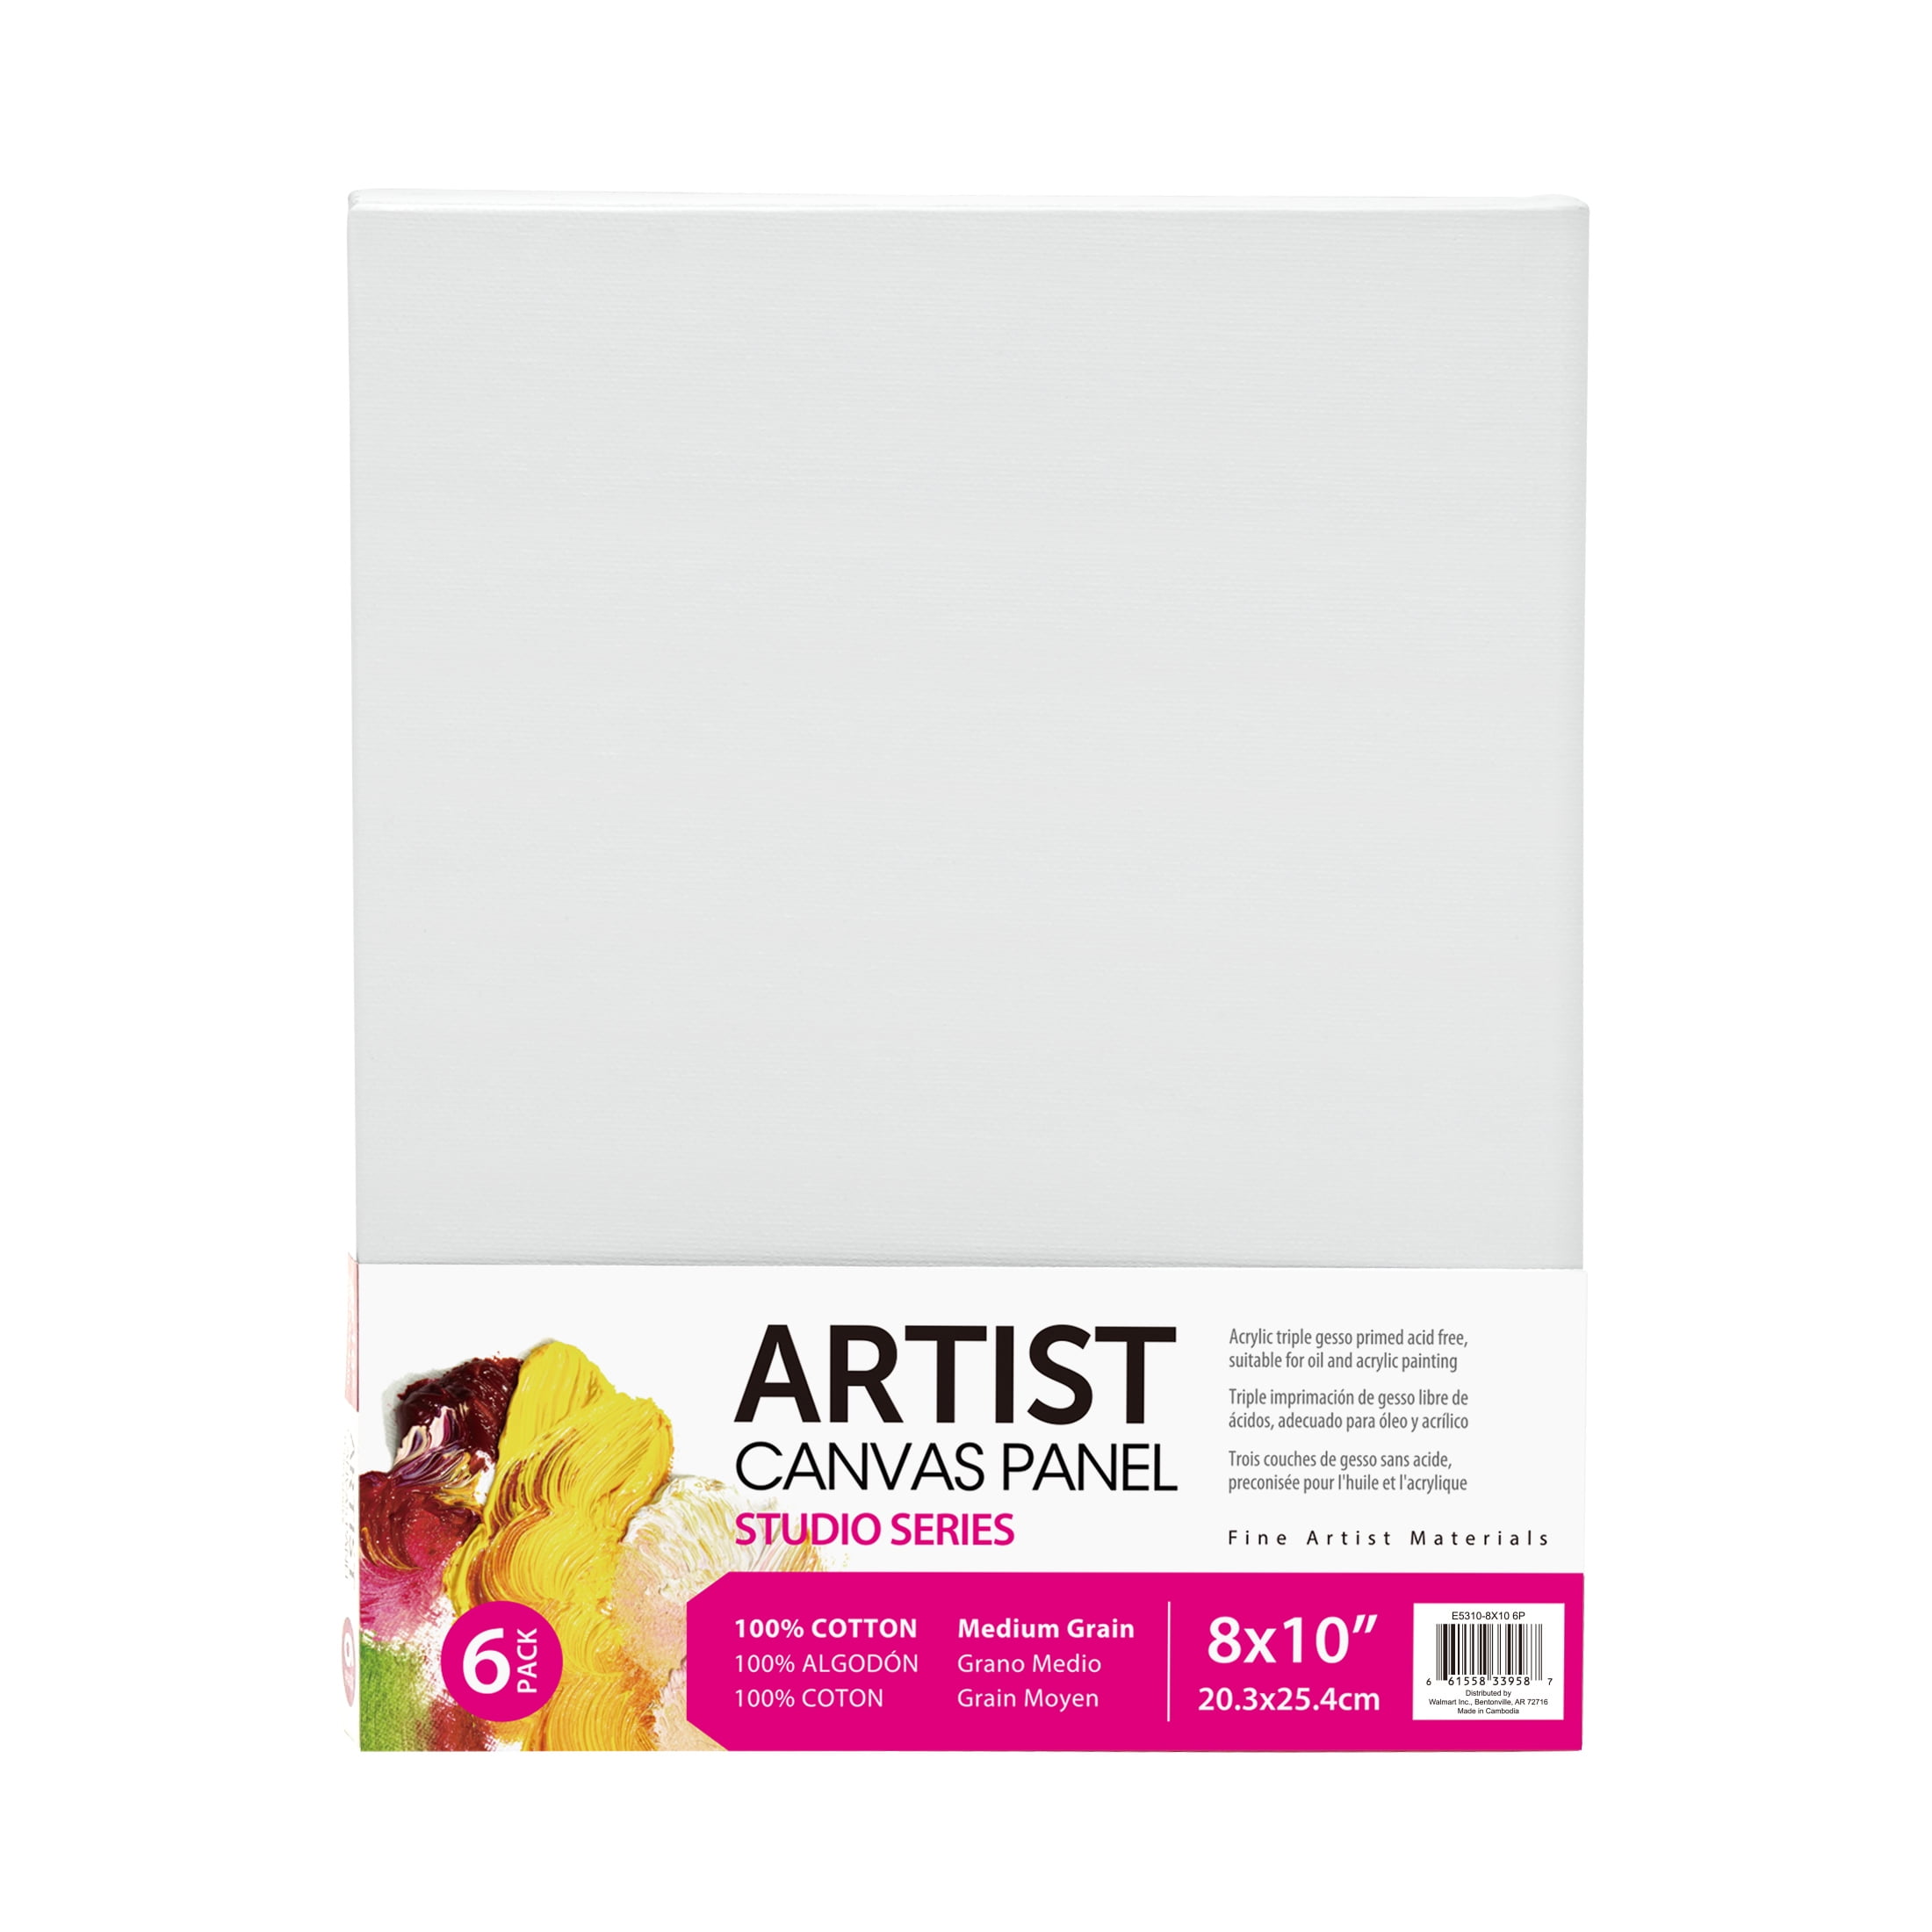   Basics Stretched Canvas For Painting, 10 pack, White, 8  x 10 : Arts, Crafts & Sewing